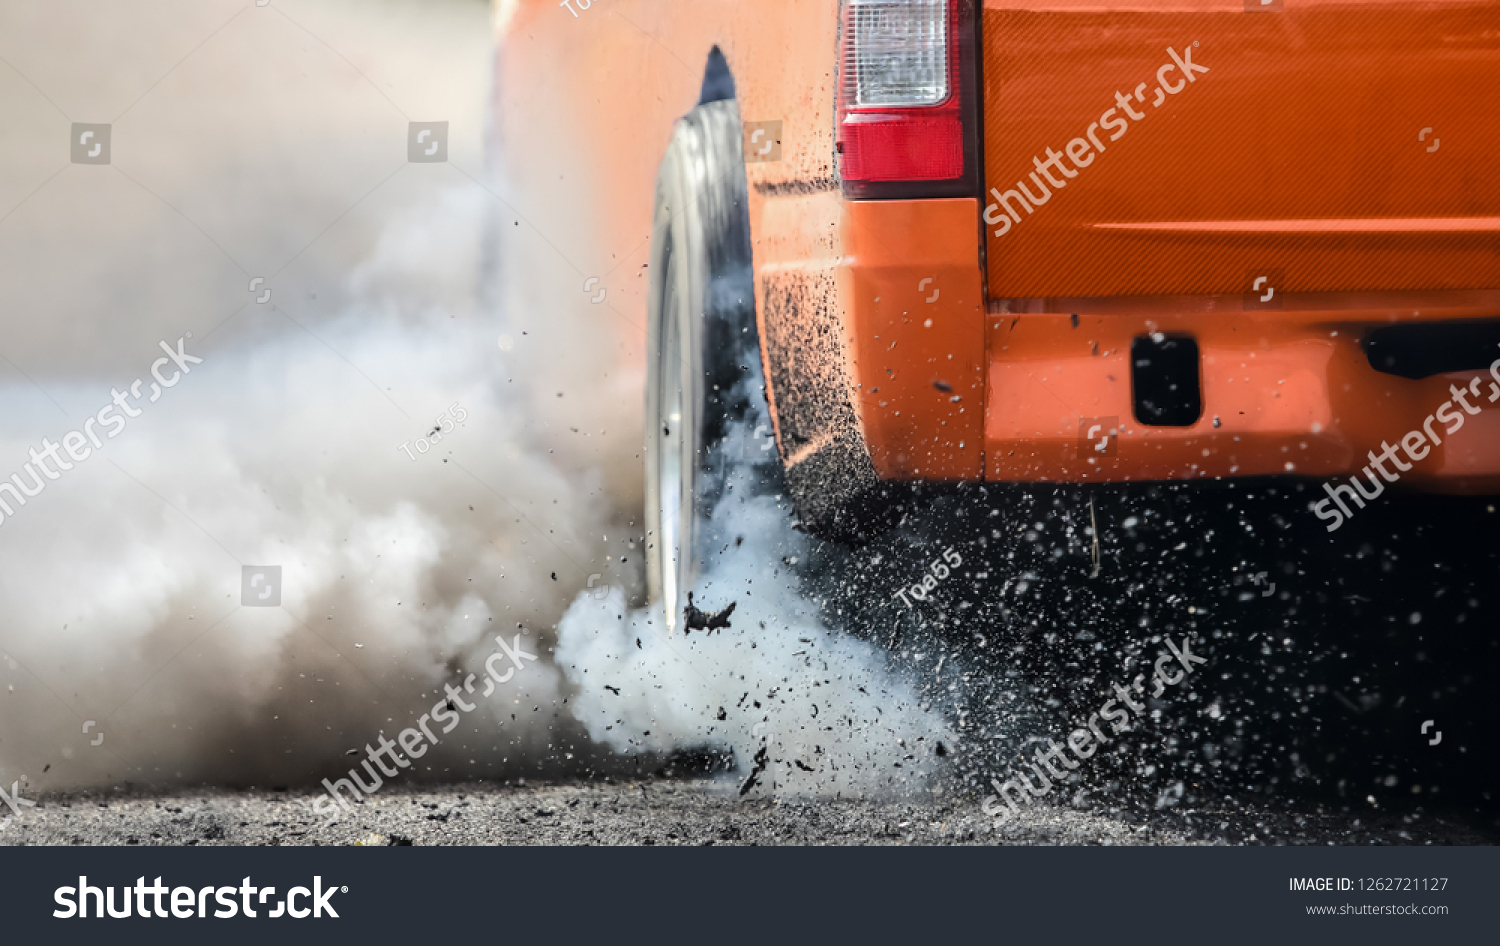 Drag racing car burns rubber off its tires in preparation for the race #1262721127